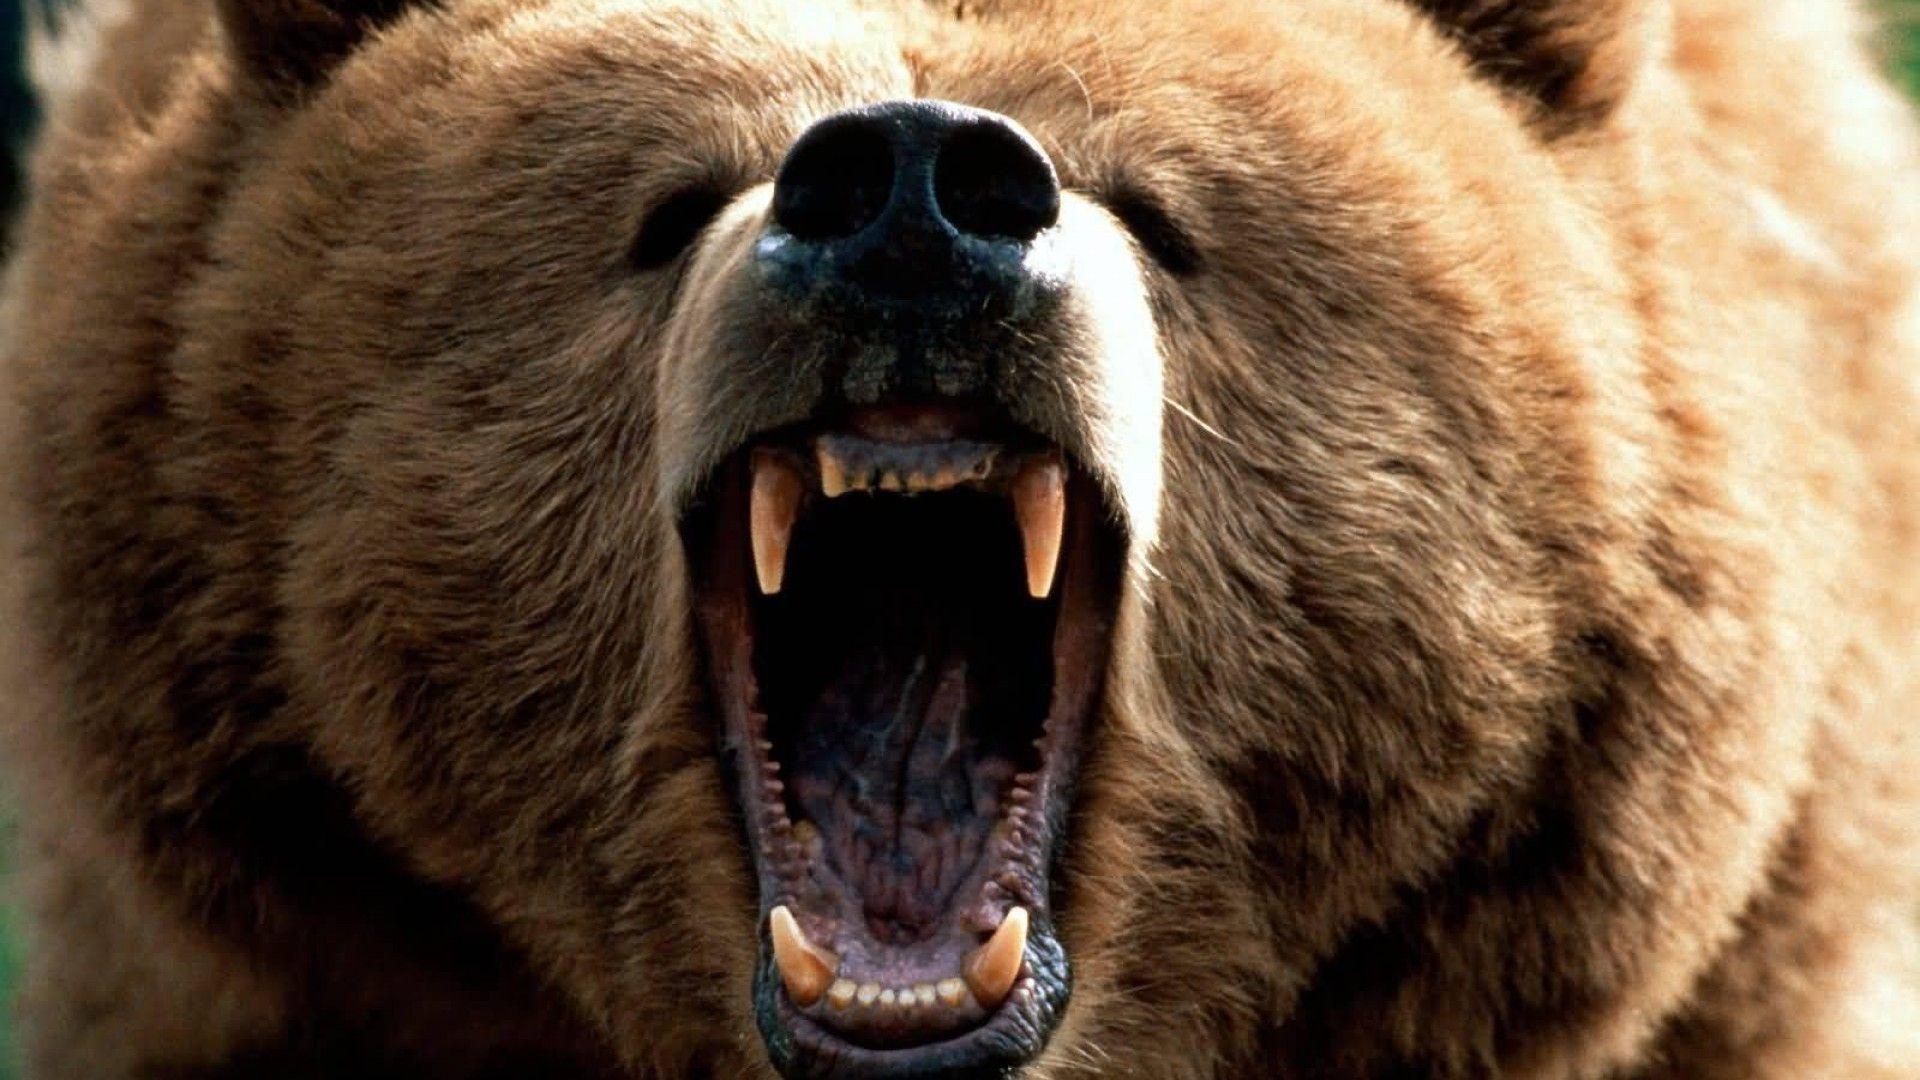 JPZ 16: Grizzly Bear Wallpaper, Picture Of Grizzly Bear HQFX, 33